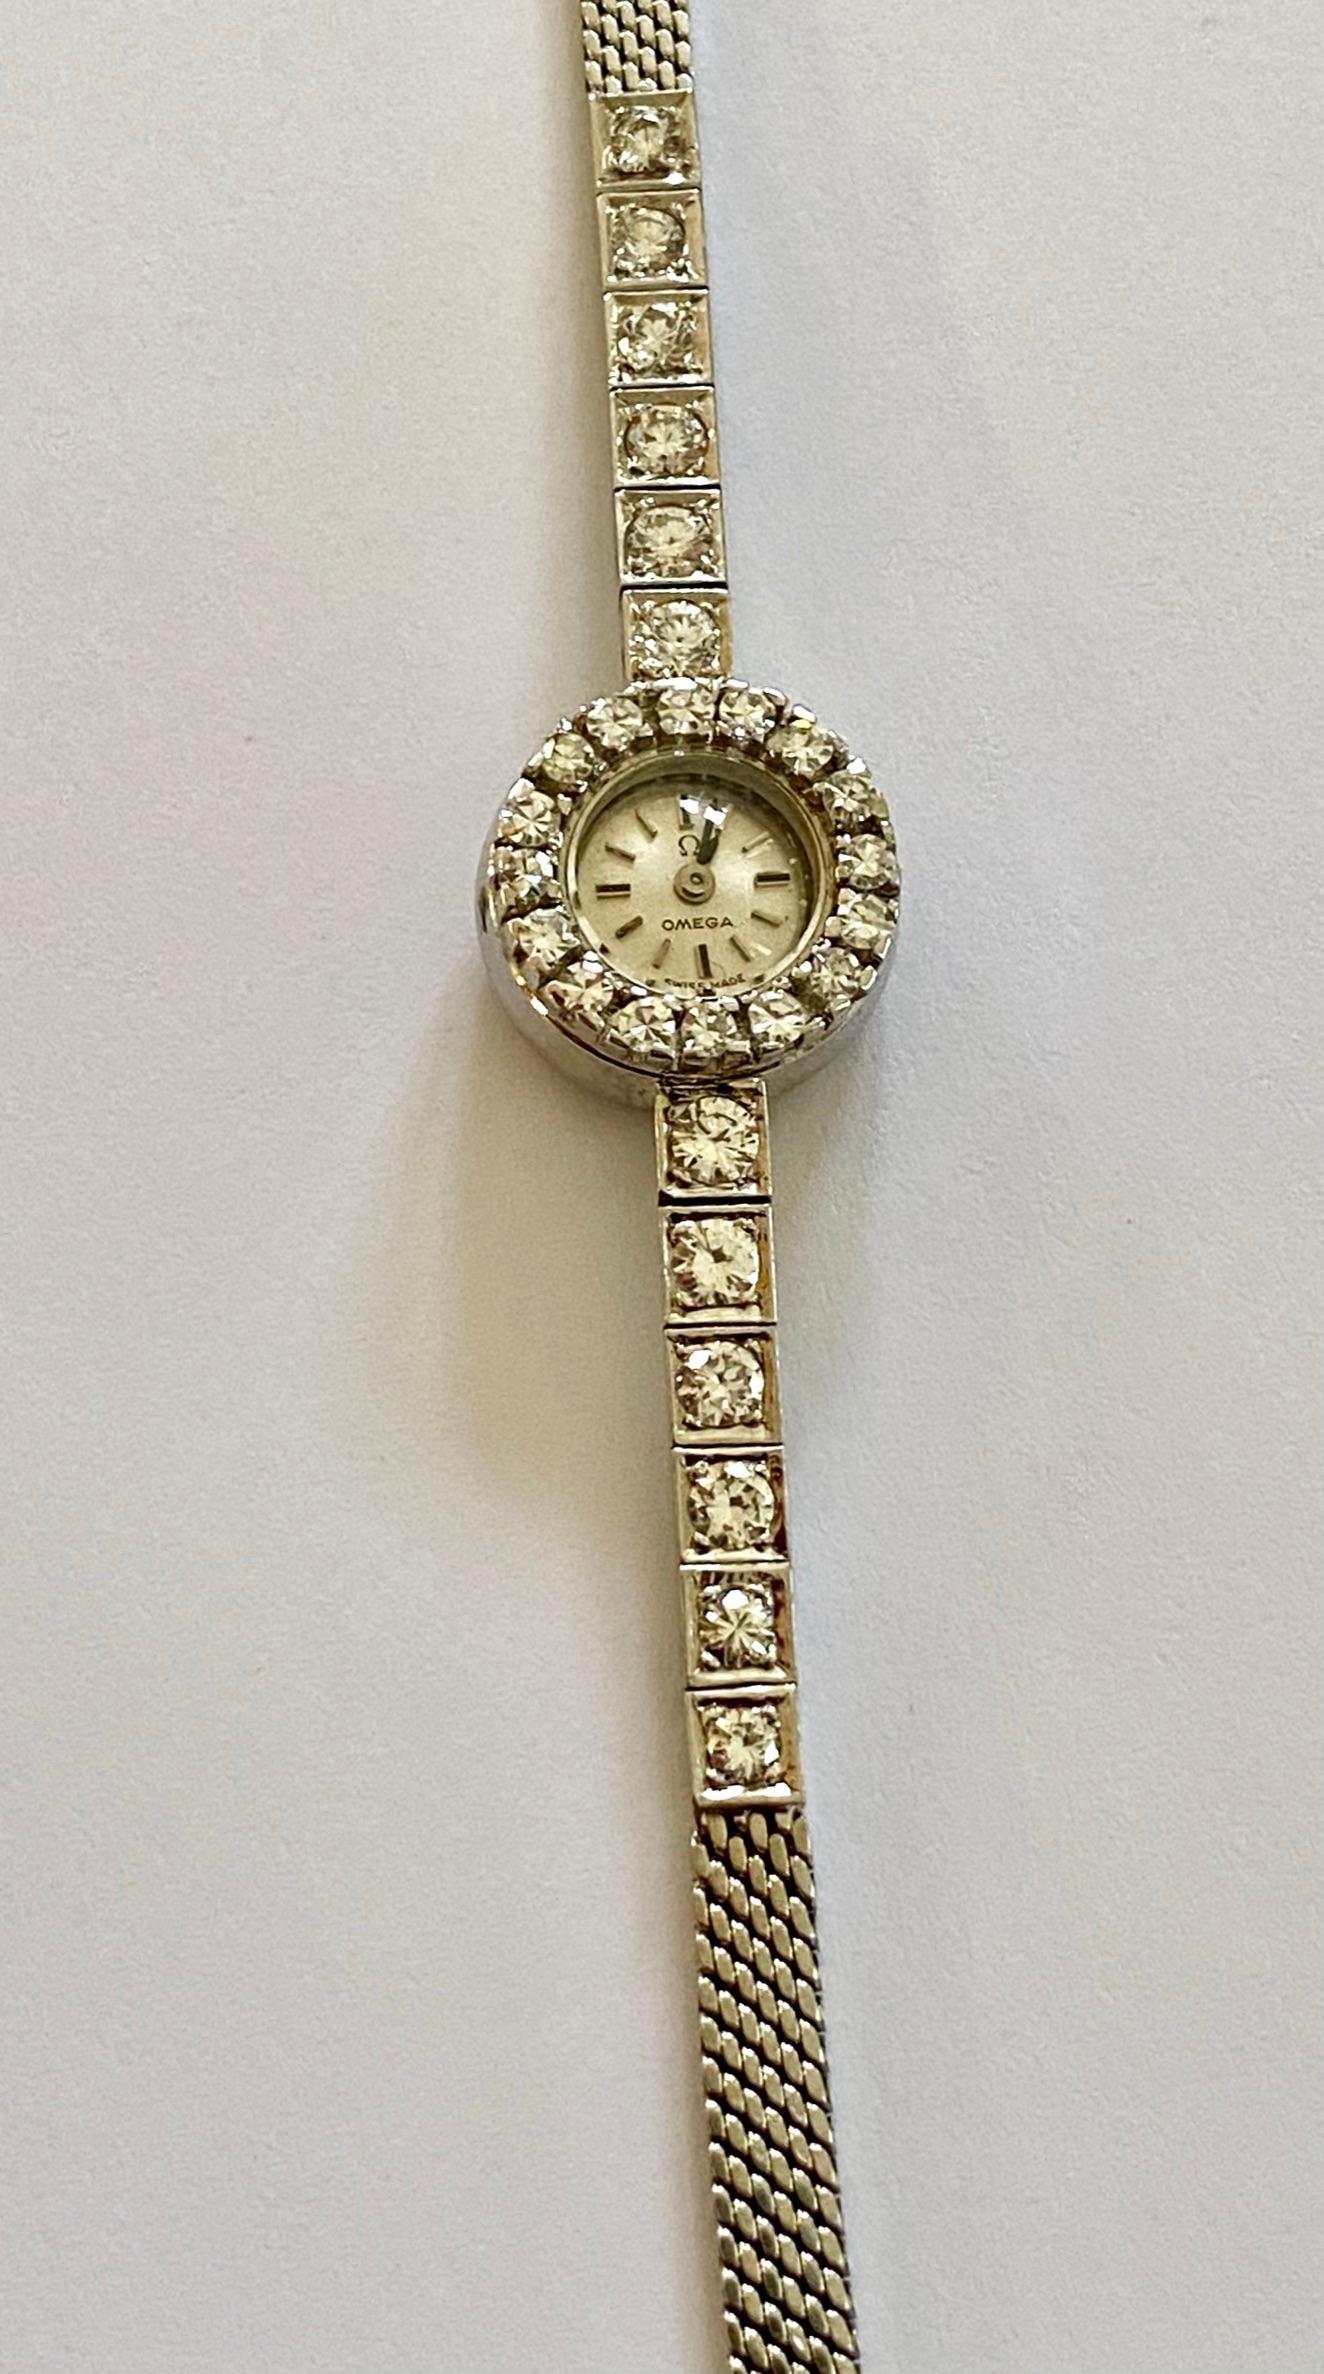 Brilliant Cut White Gold Lady's Watch, Omega 1964 Set with Diamonds